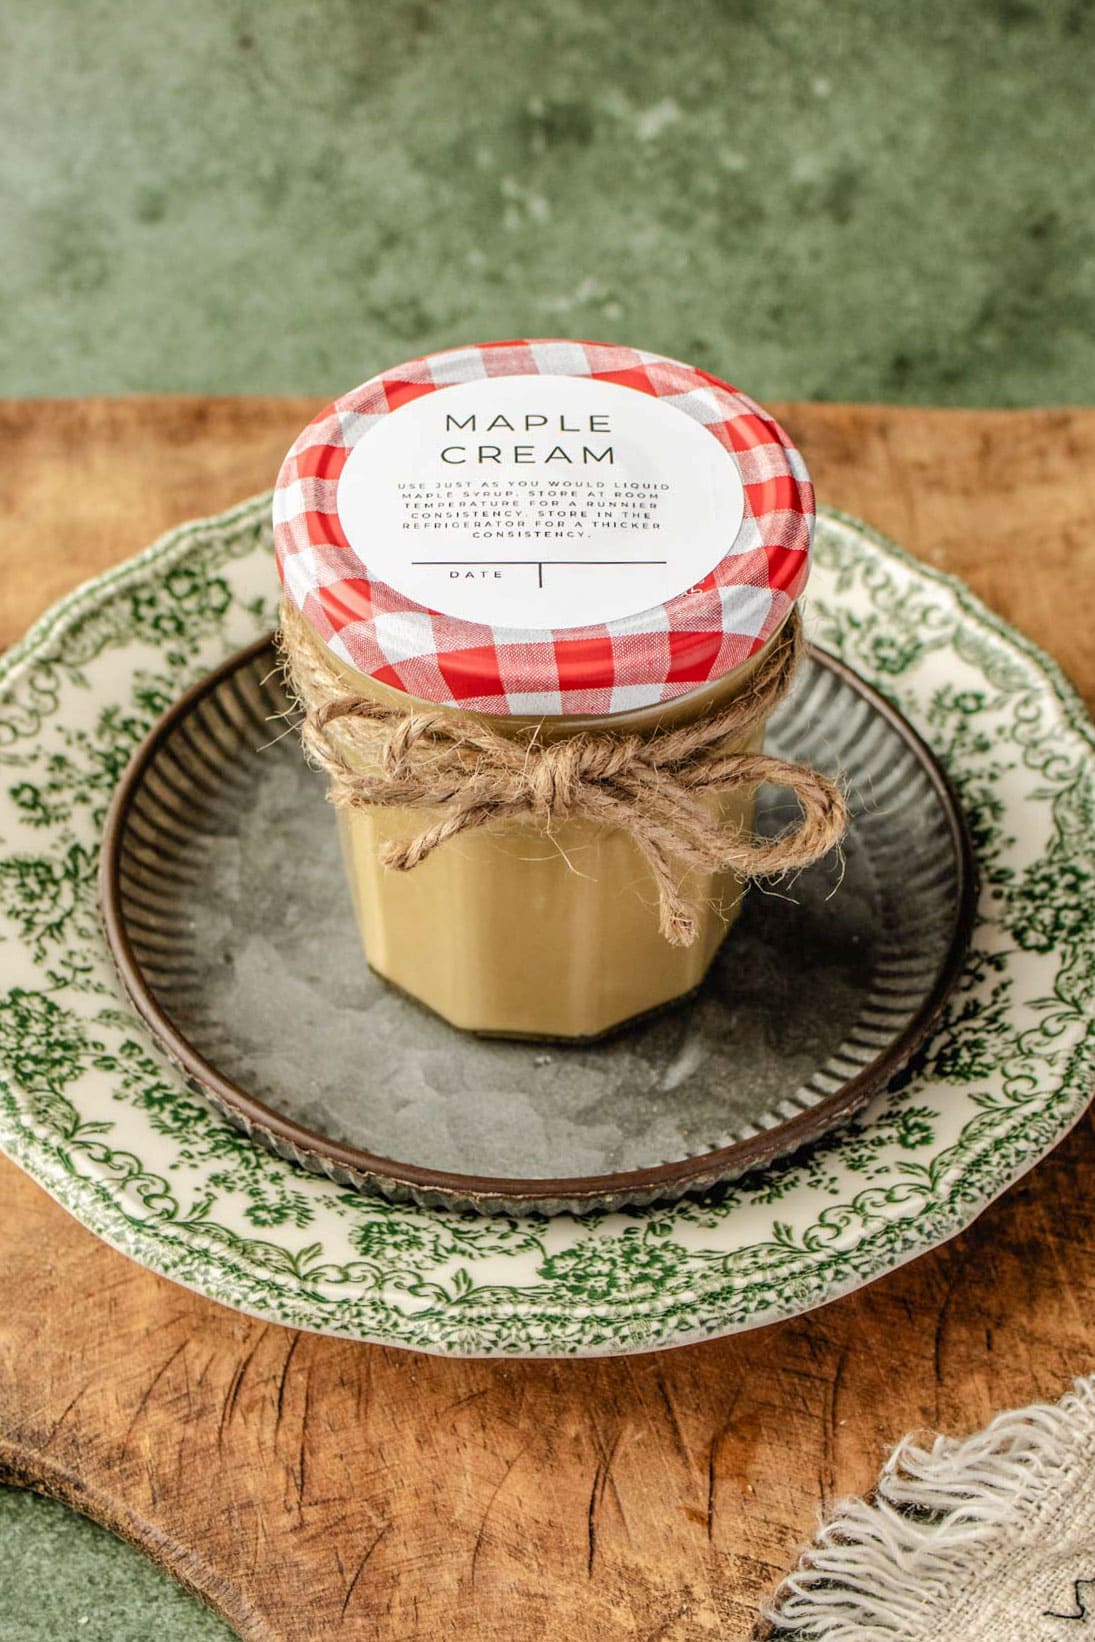 Maple cream in a jar with a bow